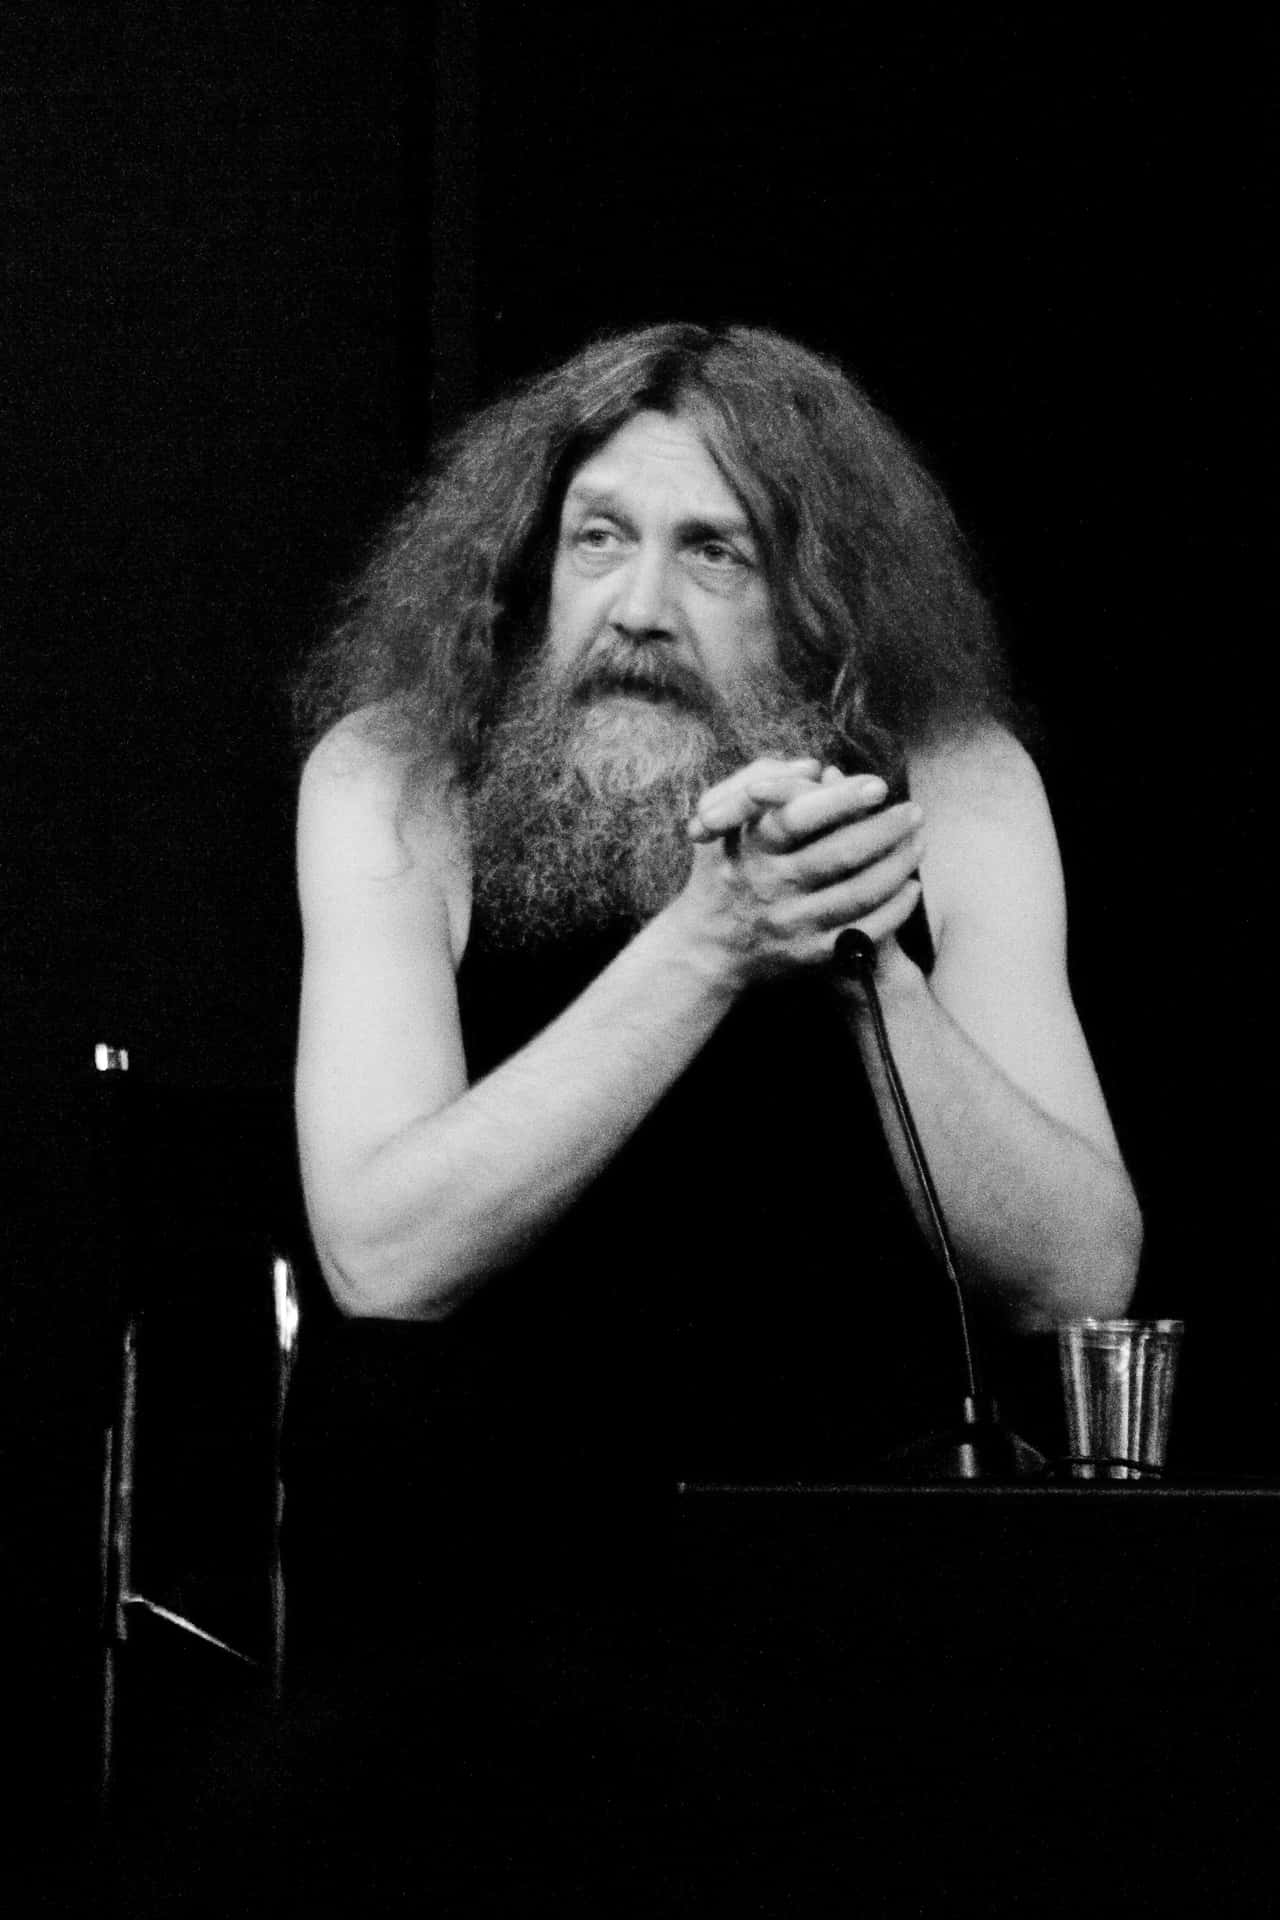 Renowned author Alan Moore in a contemplative pose Wallpaper